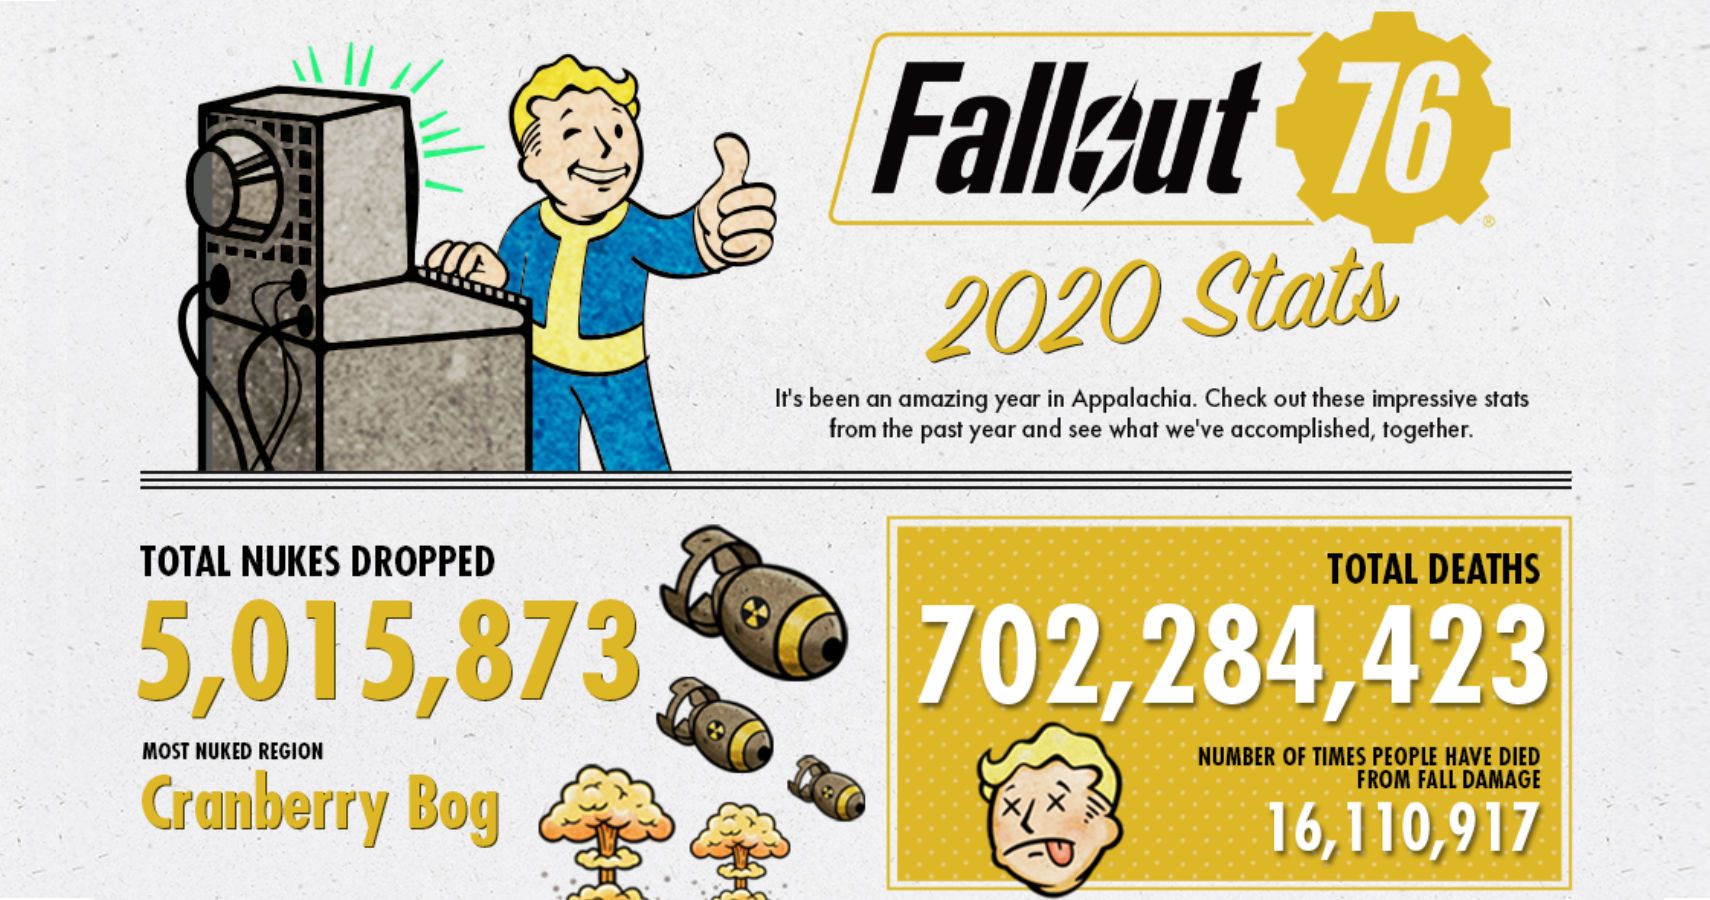 Bethesda inforgraphic for Fallout 76.